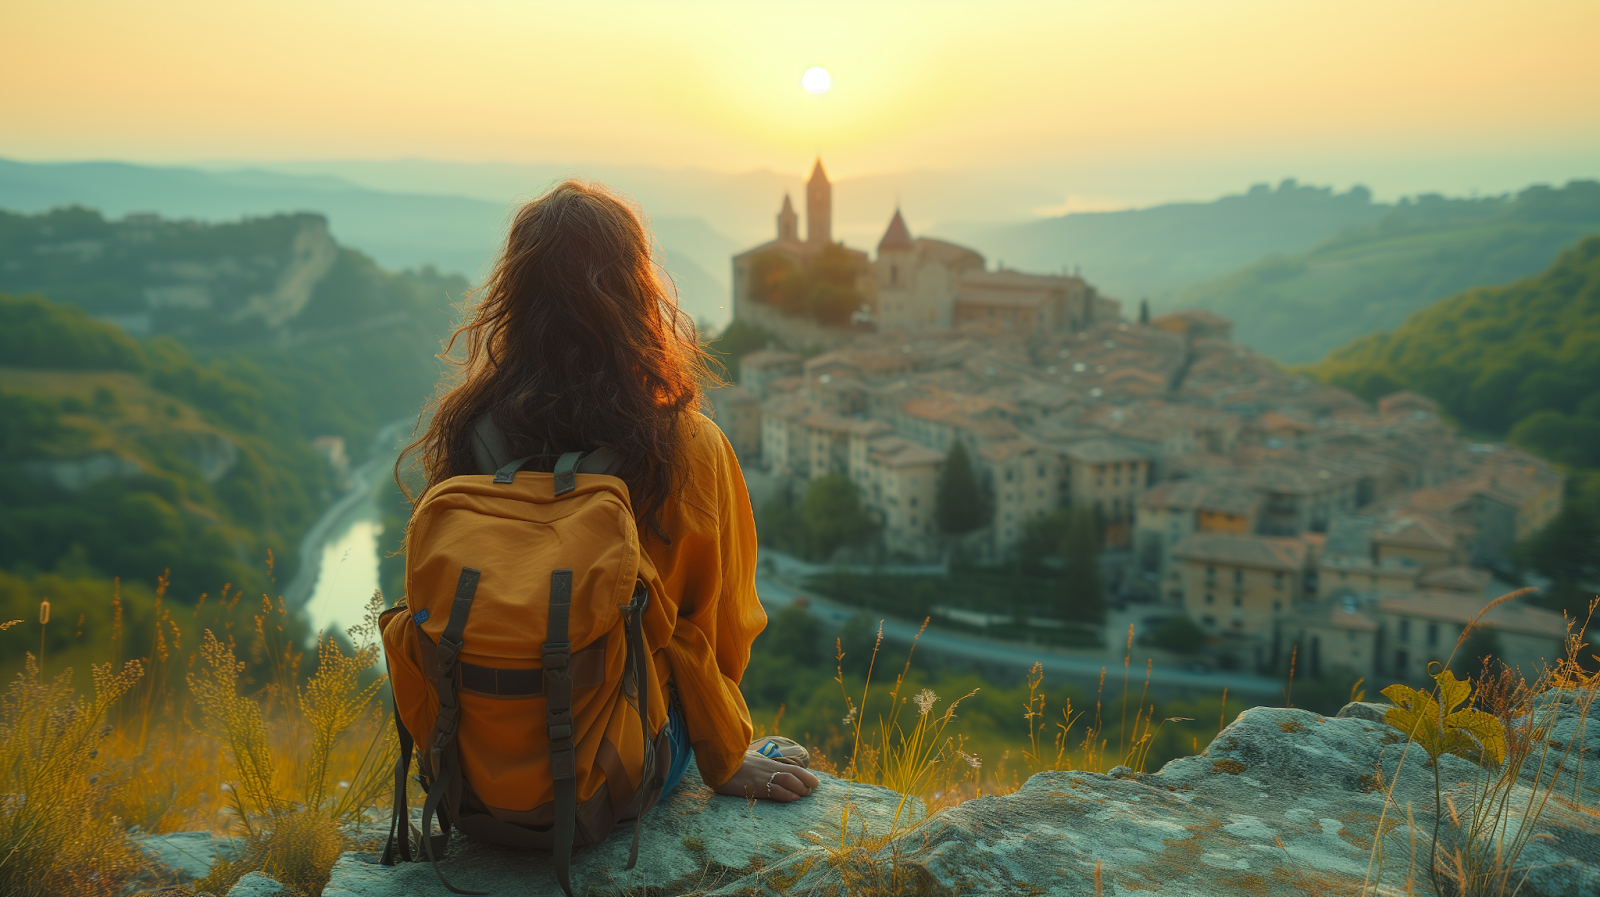 A traveler overlooking a small town in San Marino